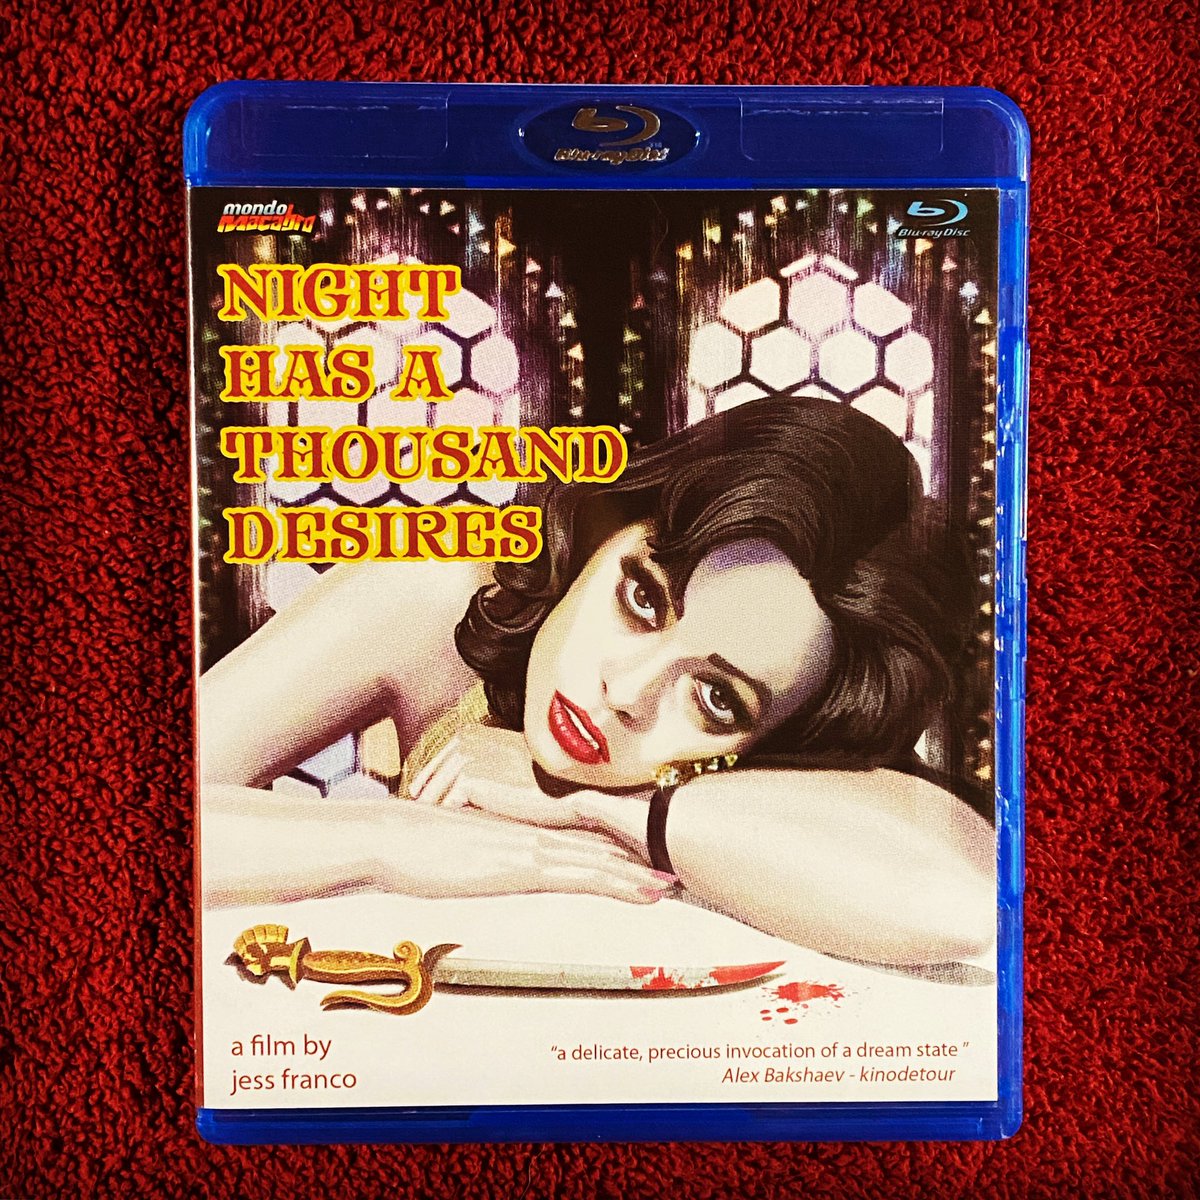 Happy Franco Friday, y’all! I’m having a delicious cocktail and unwinding with this one before dipping into something wilder a little later. 🍸 

Now watching - NIGHT HAS A THOUSAND DESIRES (1984) D. Jess Franco

#nighthasathousanddesires #jessfranco #linaromay #mondomacabro